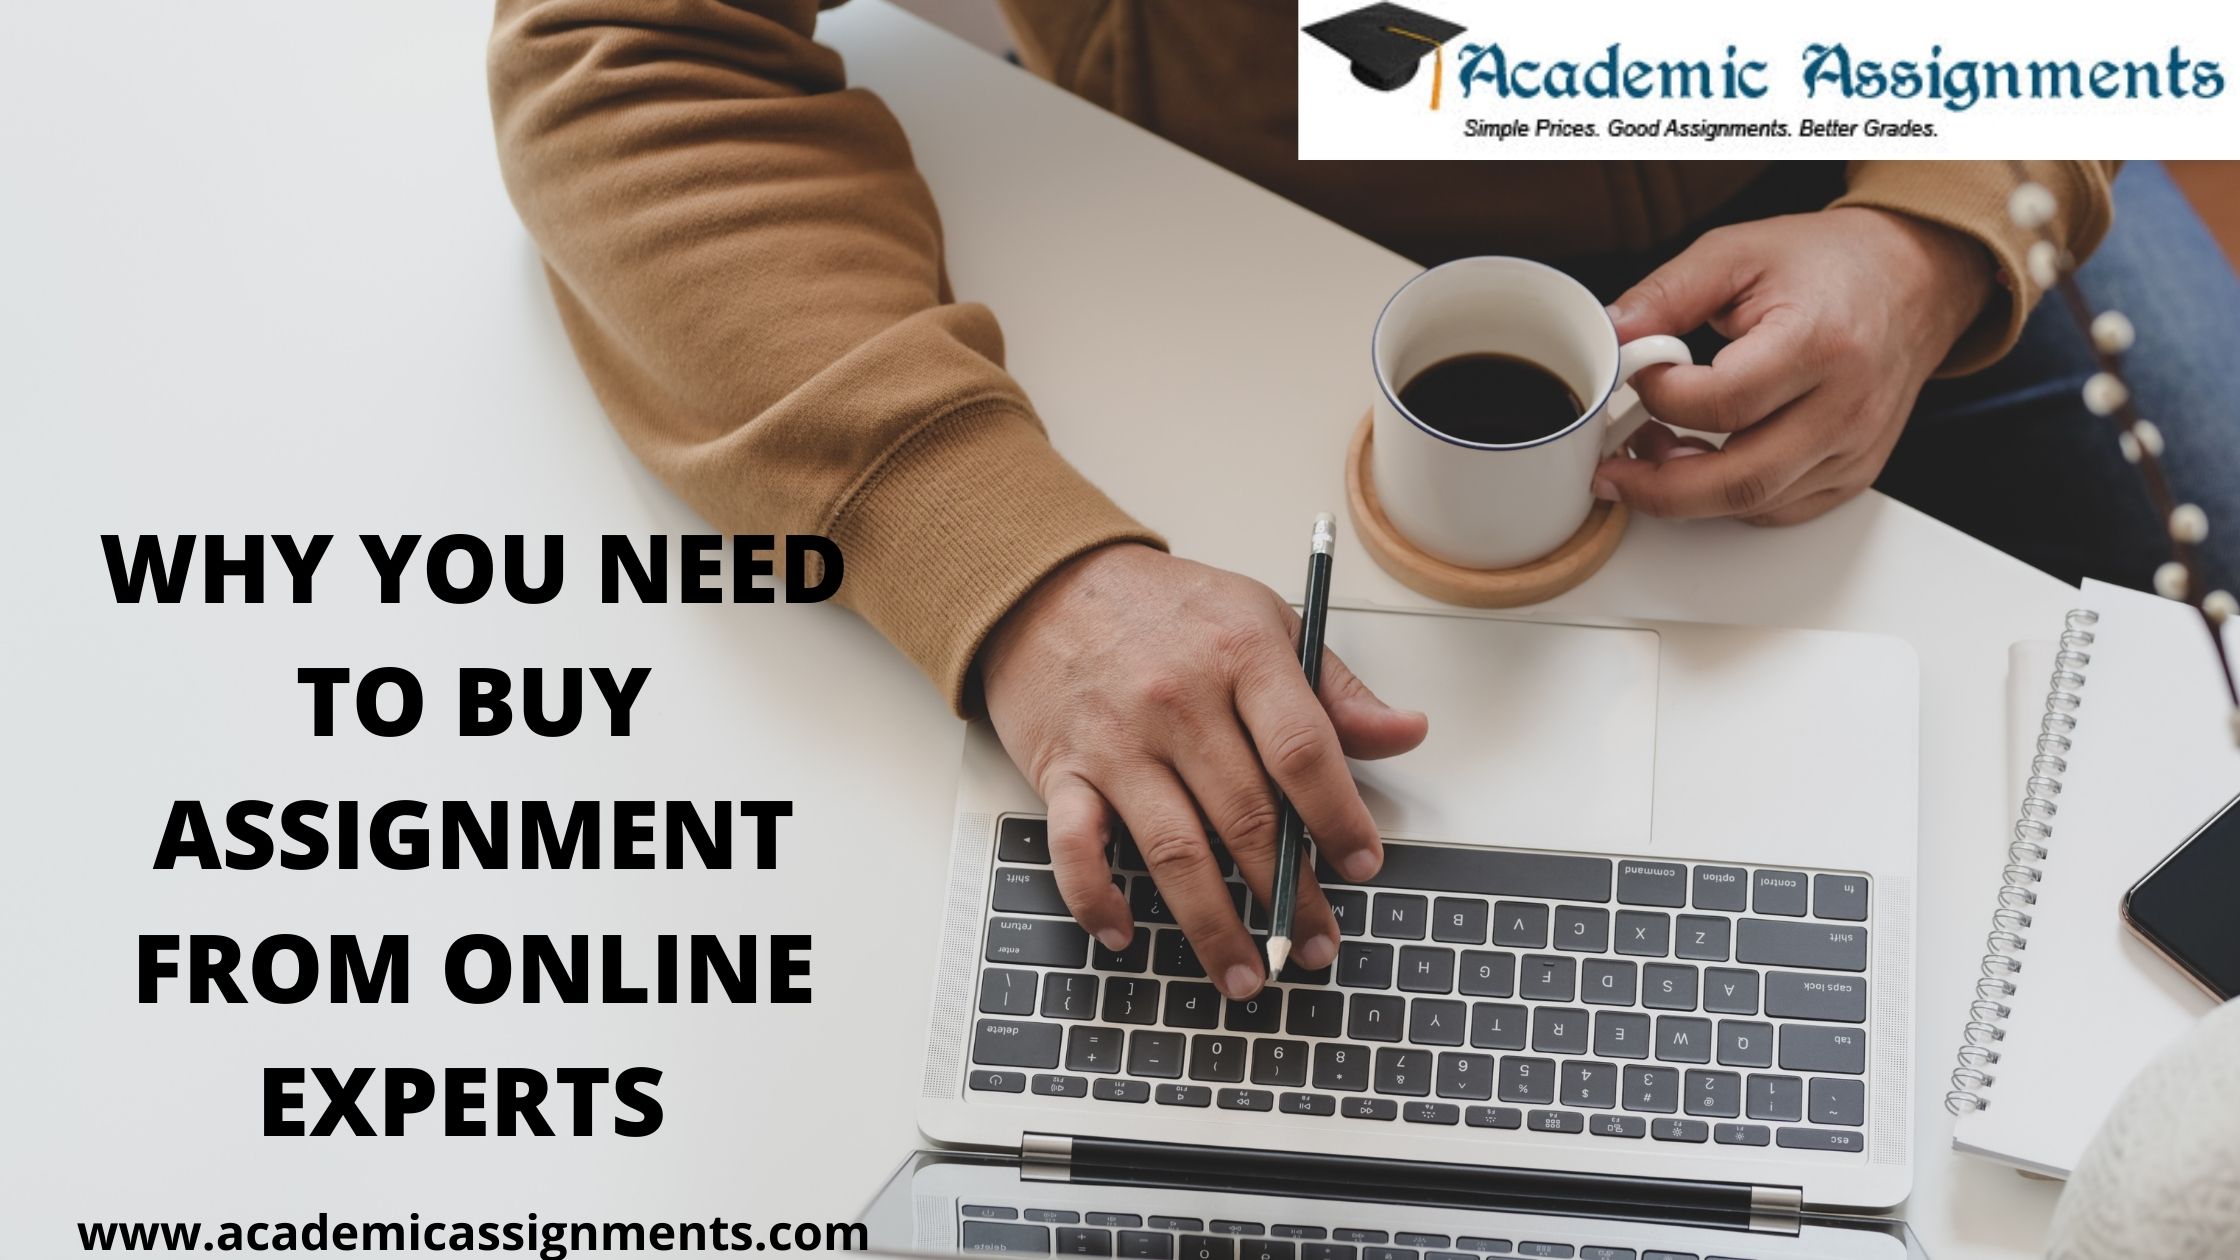 WHY YOU NEED TO BUY ASSIGNMENT FROM ONLINE EXPERTS